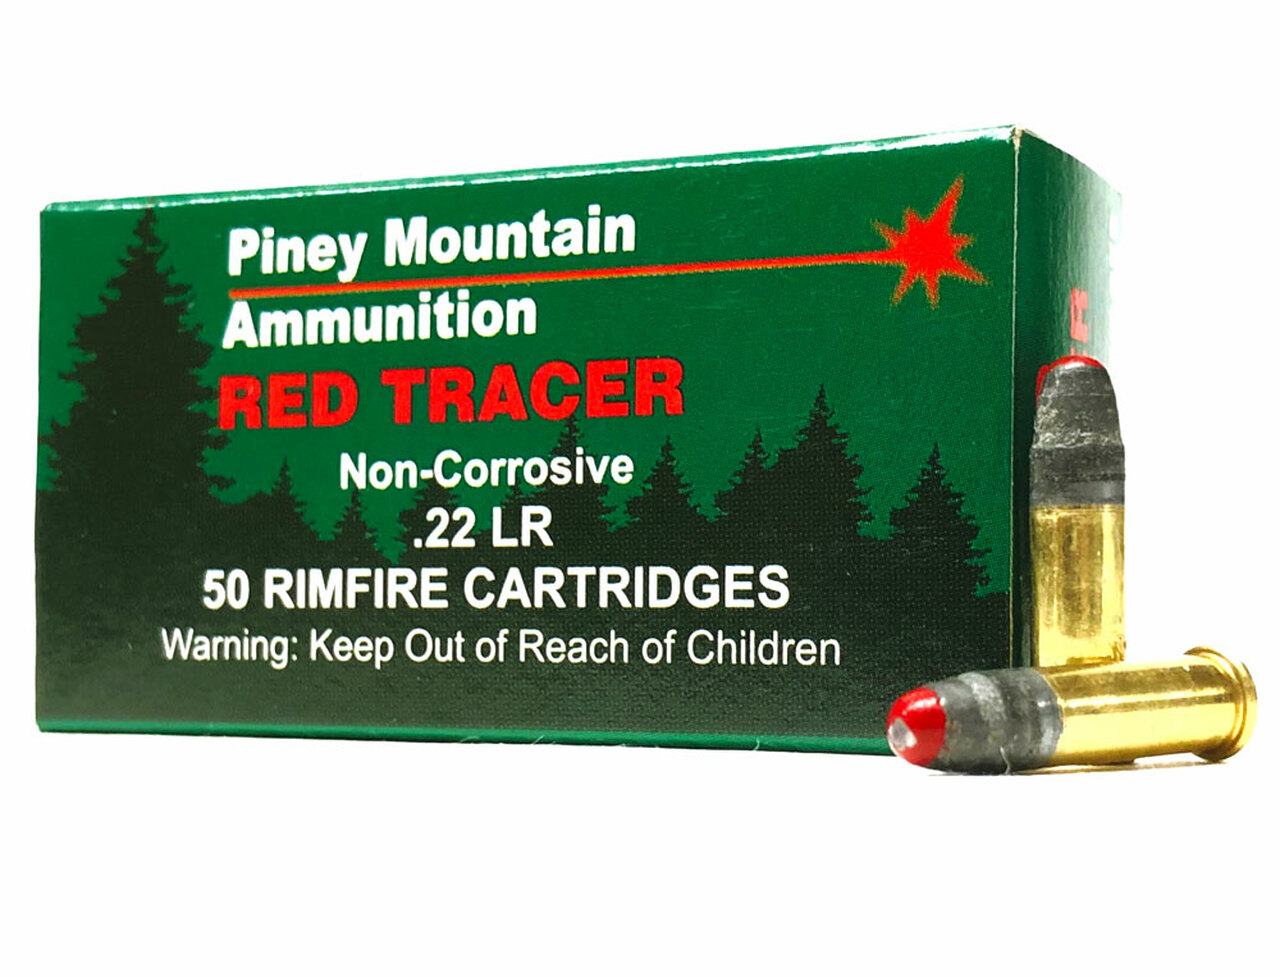 CCI .22LR Suppressor Small Game SAME DAY SHIPPING 45 Grain Subsonic Hollow Point – 50 Rounds (Box) [NO TAX outside Texas] Product Image